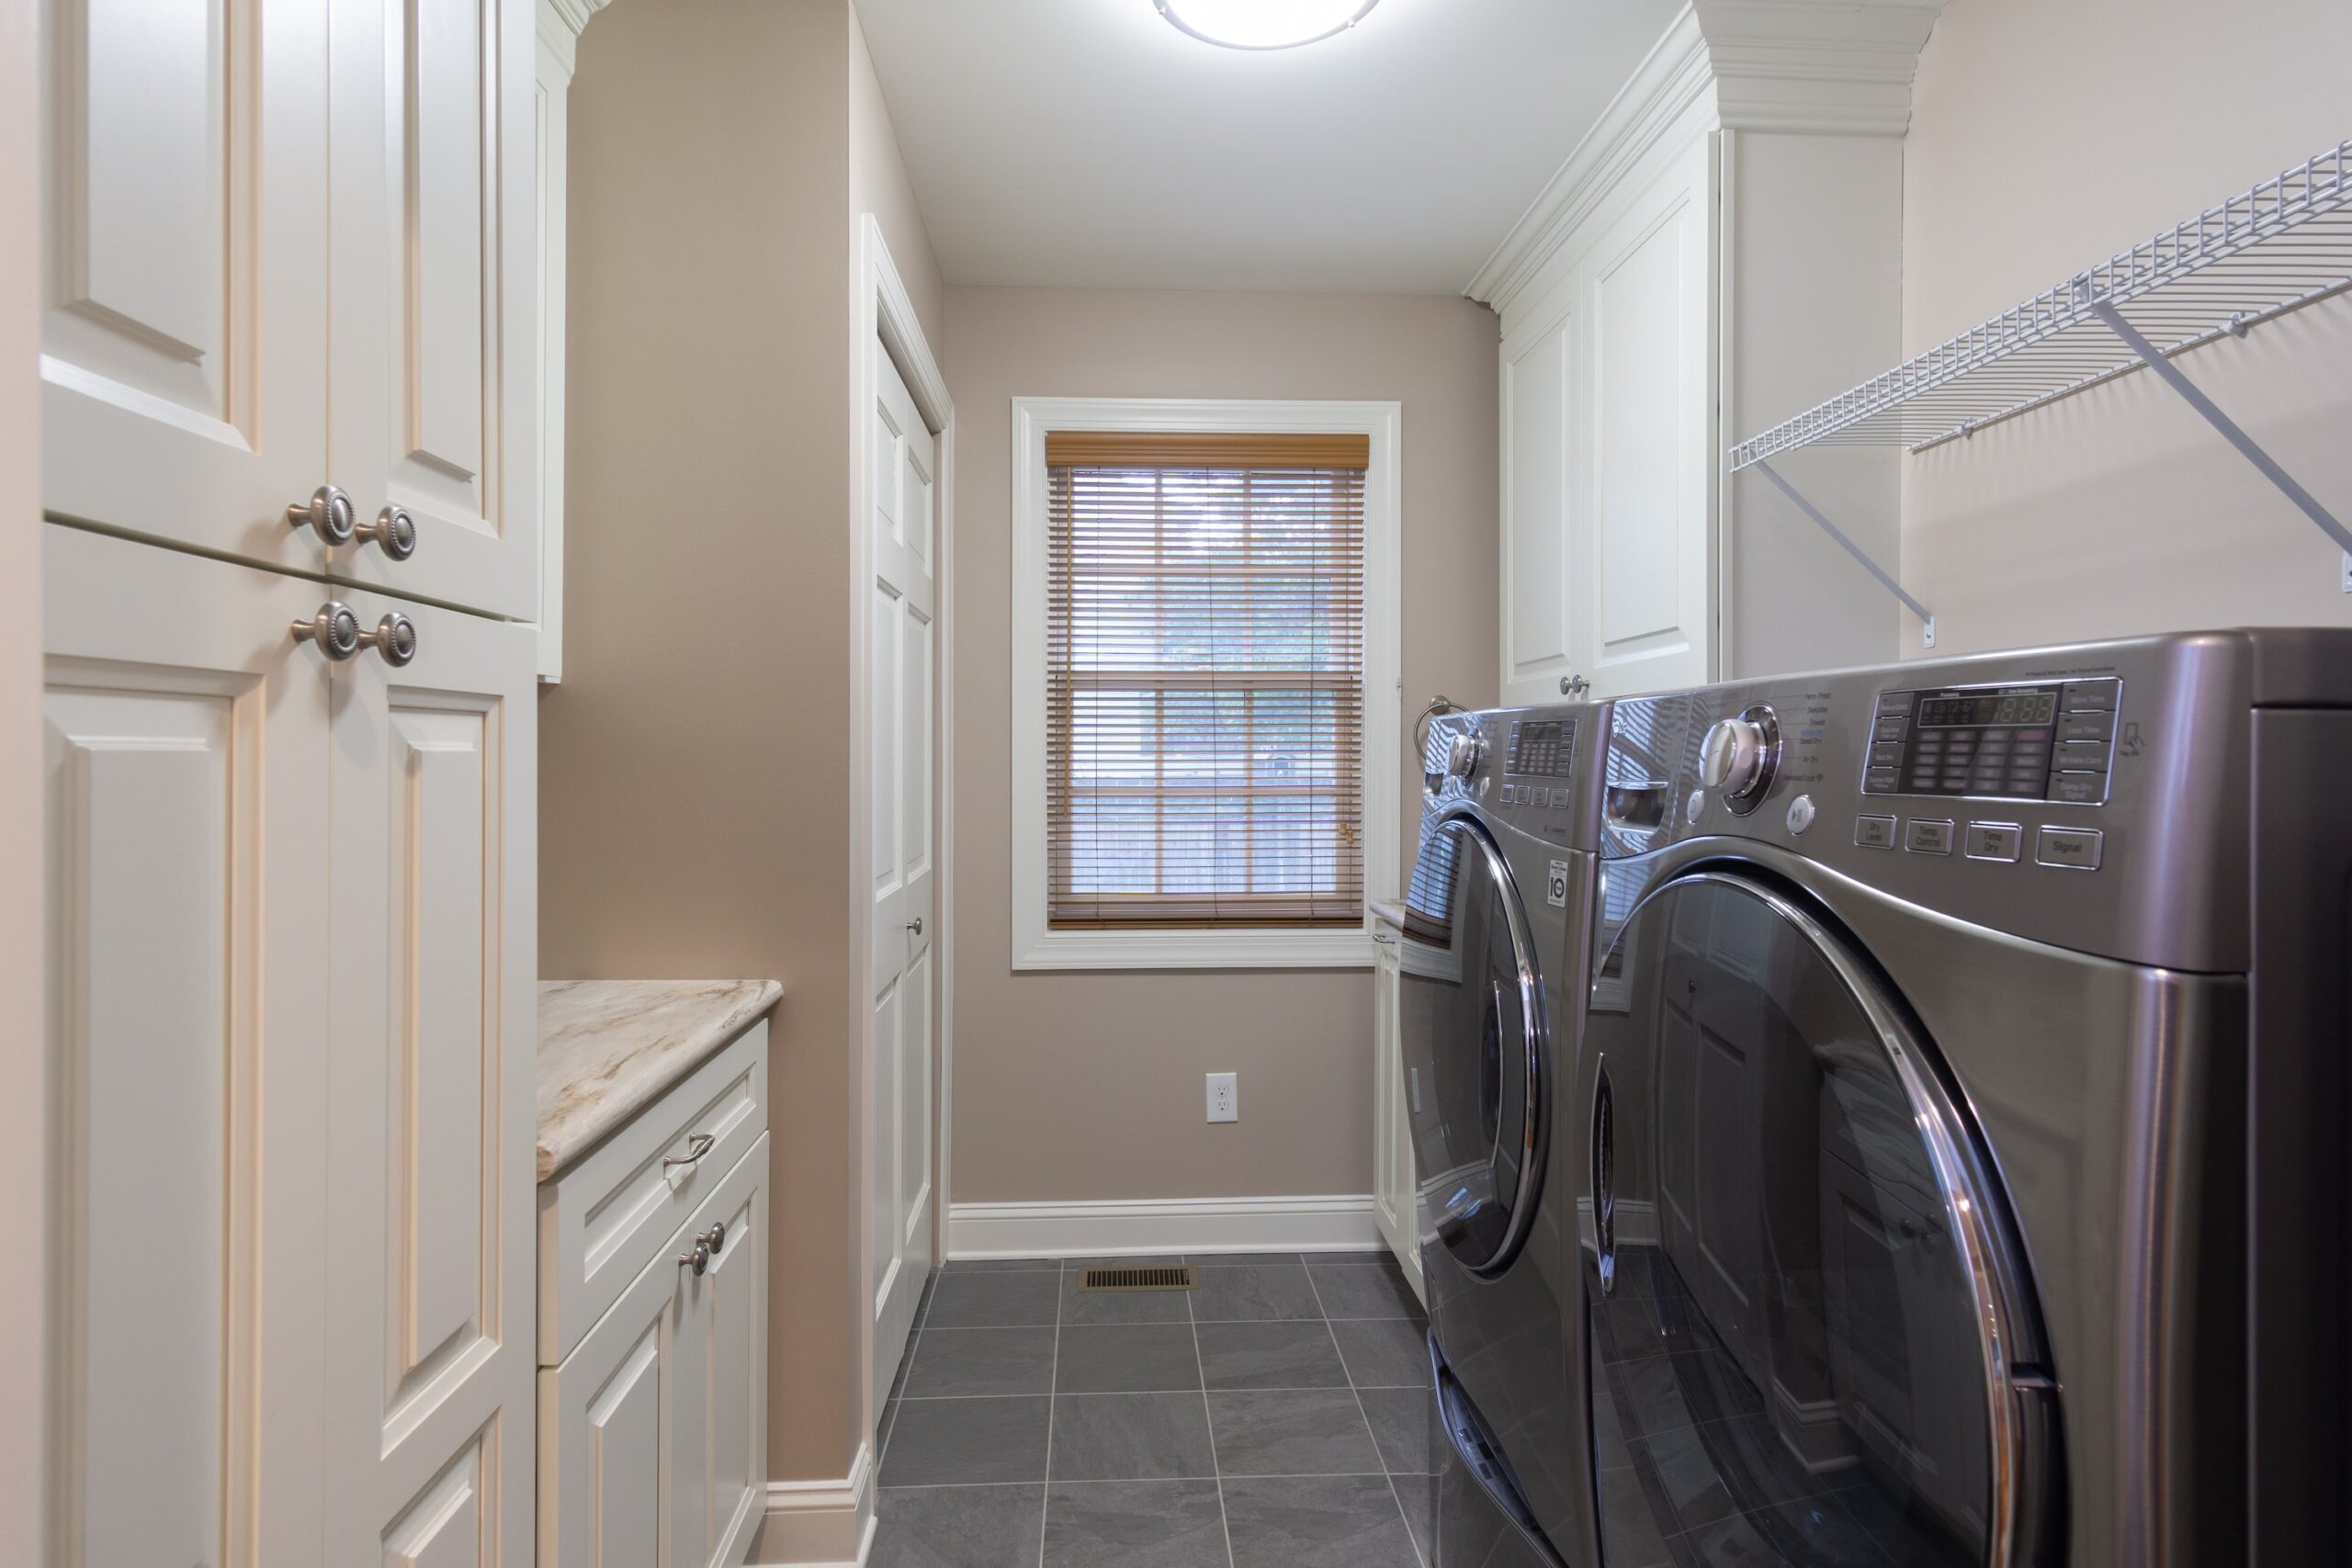 Laundry room from amiano and son